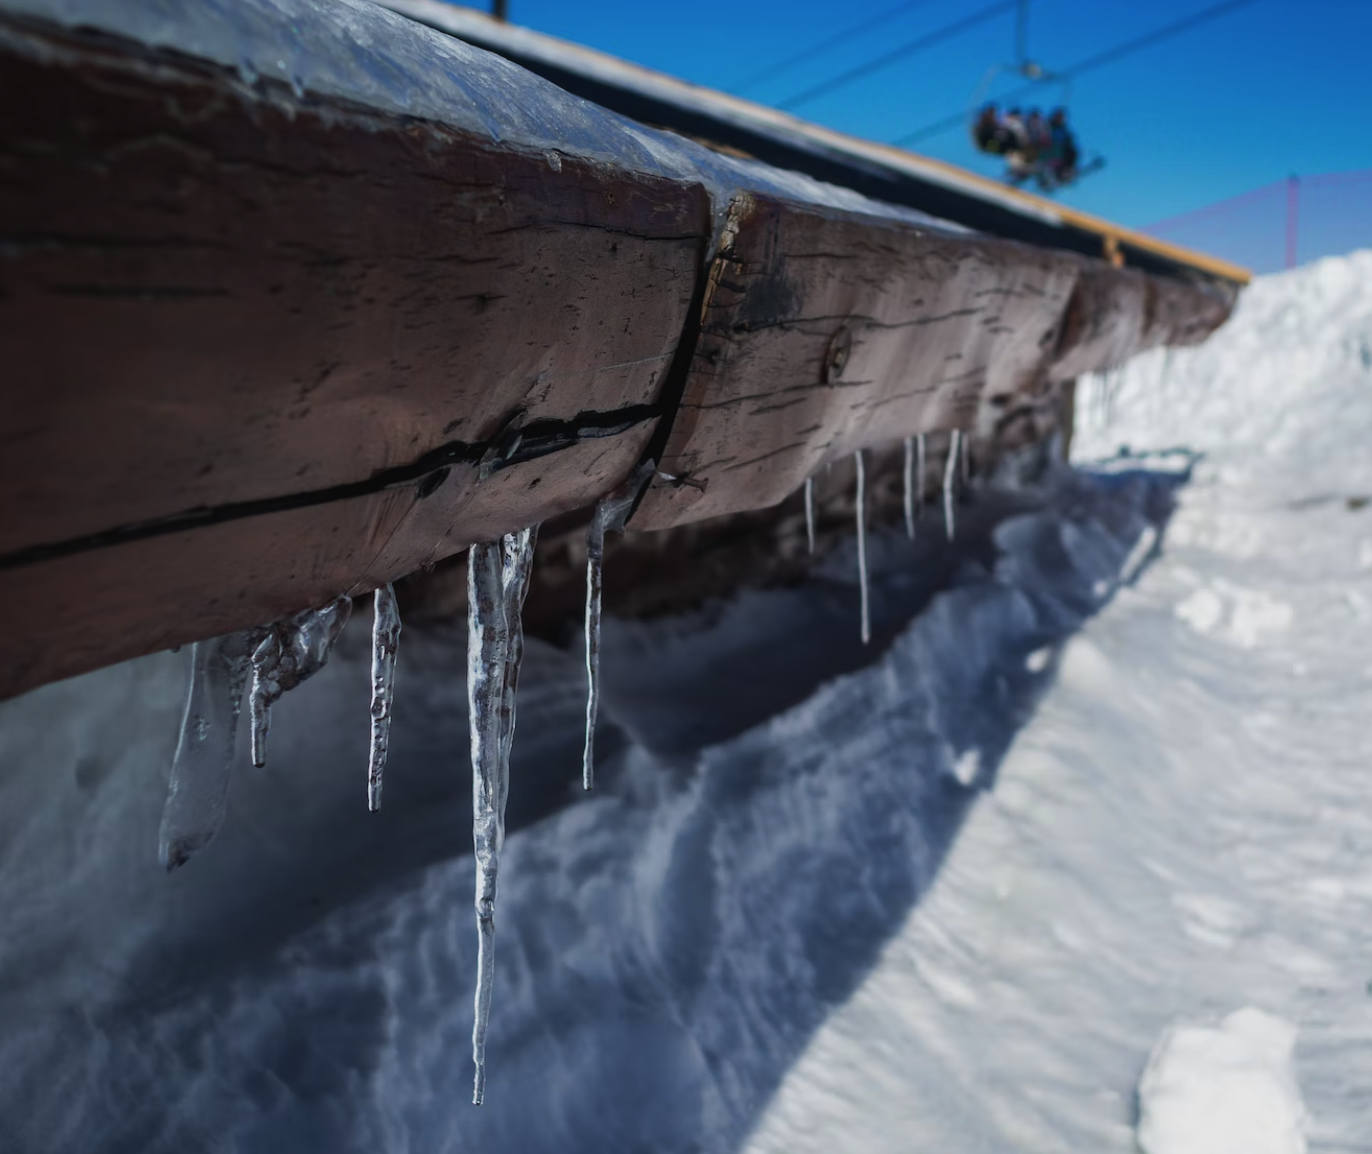 Ice dam and icicle prevention solutions in Boston, MA. Our patented roof melt technology is energy-efficient and affordable. Contact us today to talk to an expert!